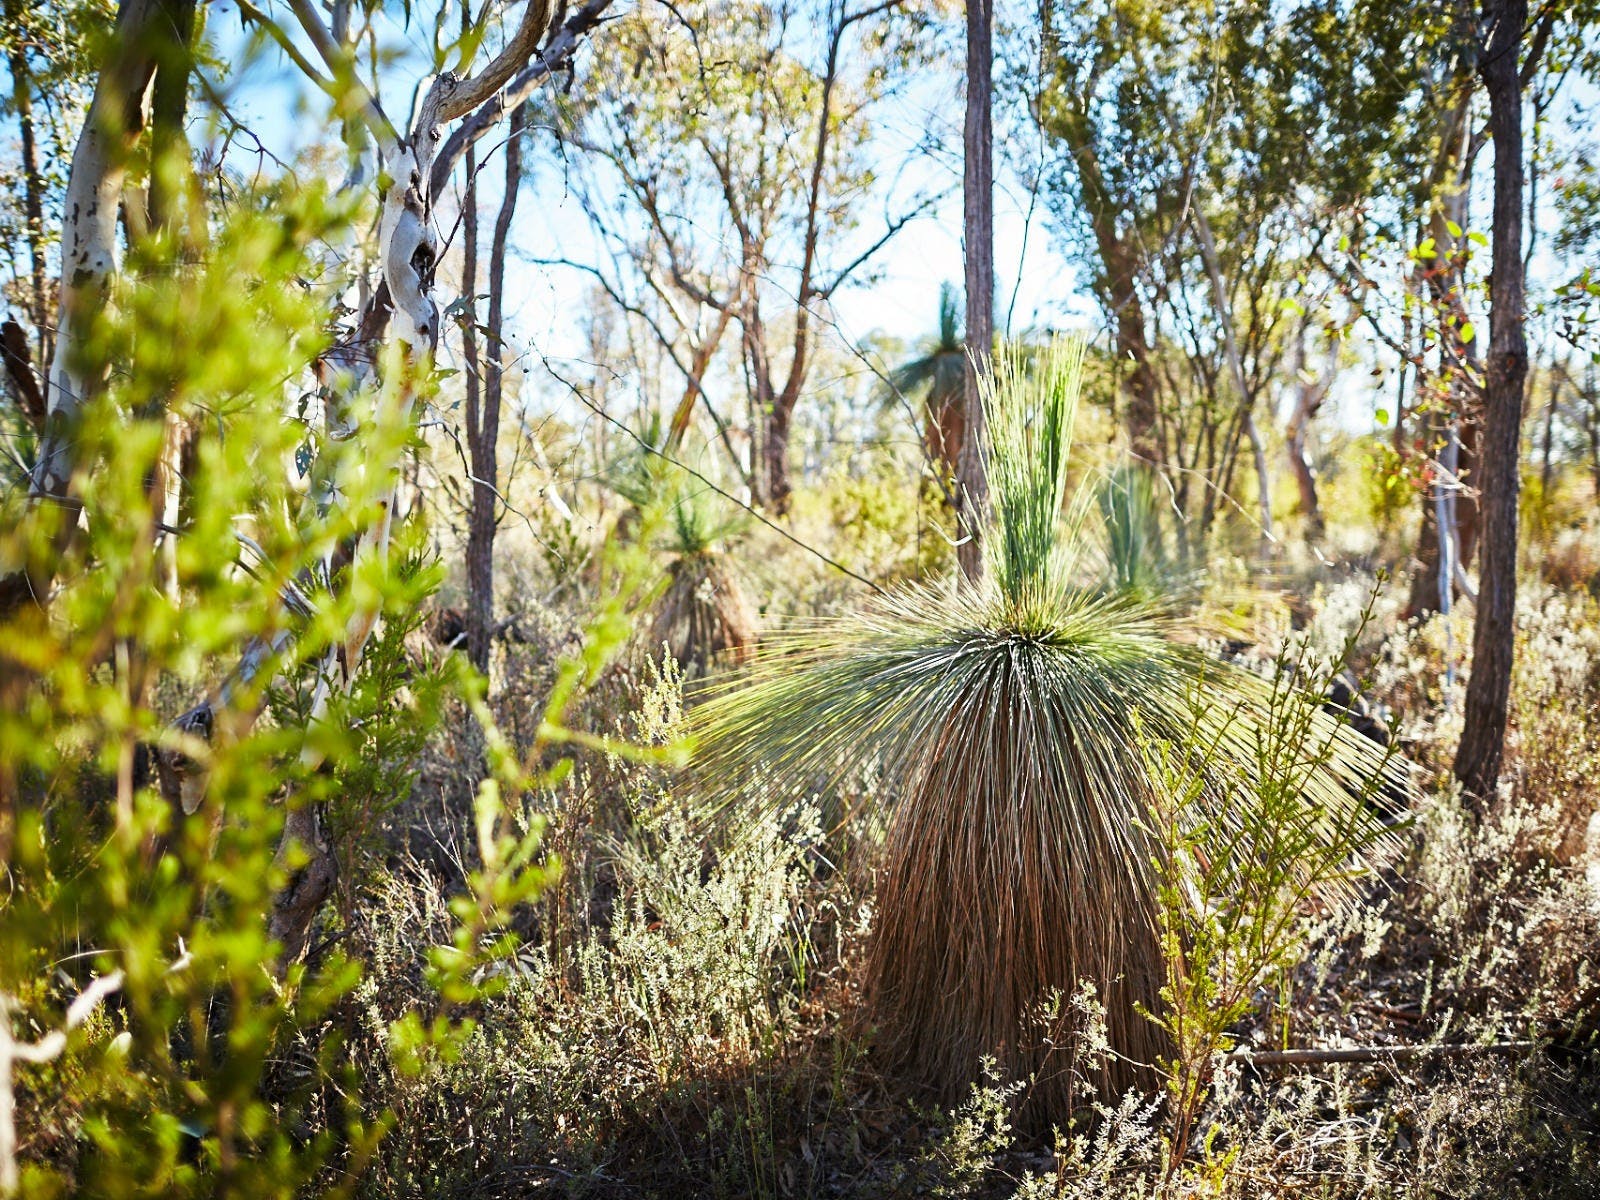 Grass tree, other native trees and bushes, native grasses, sunny day.